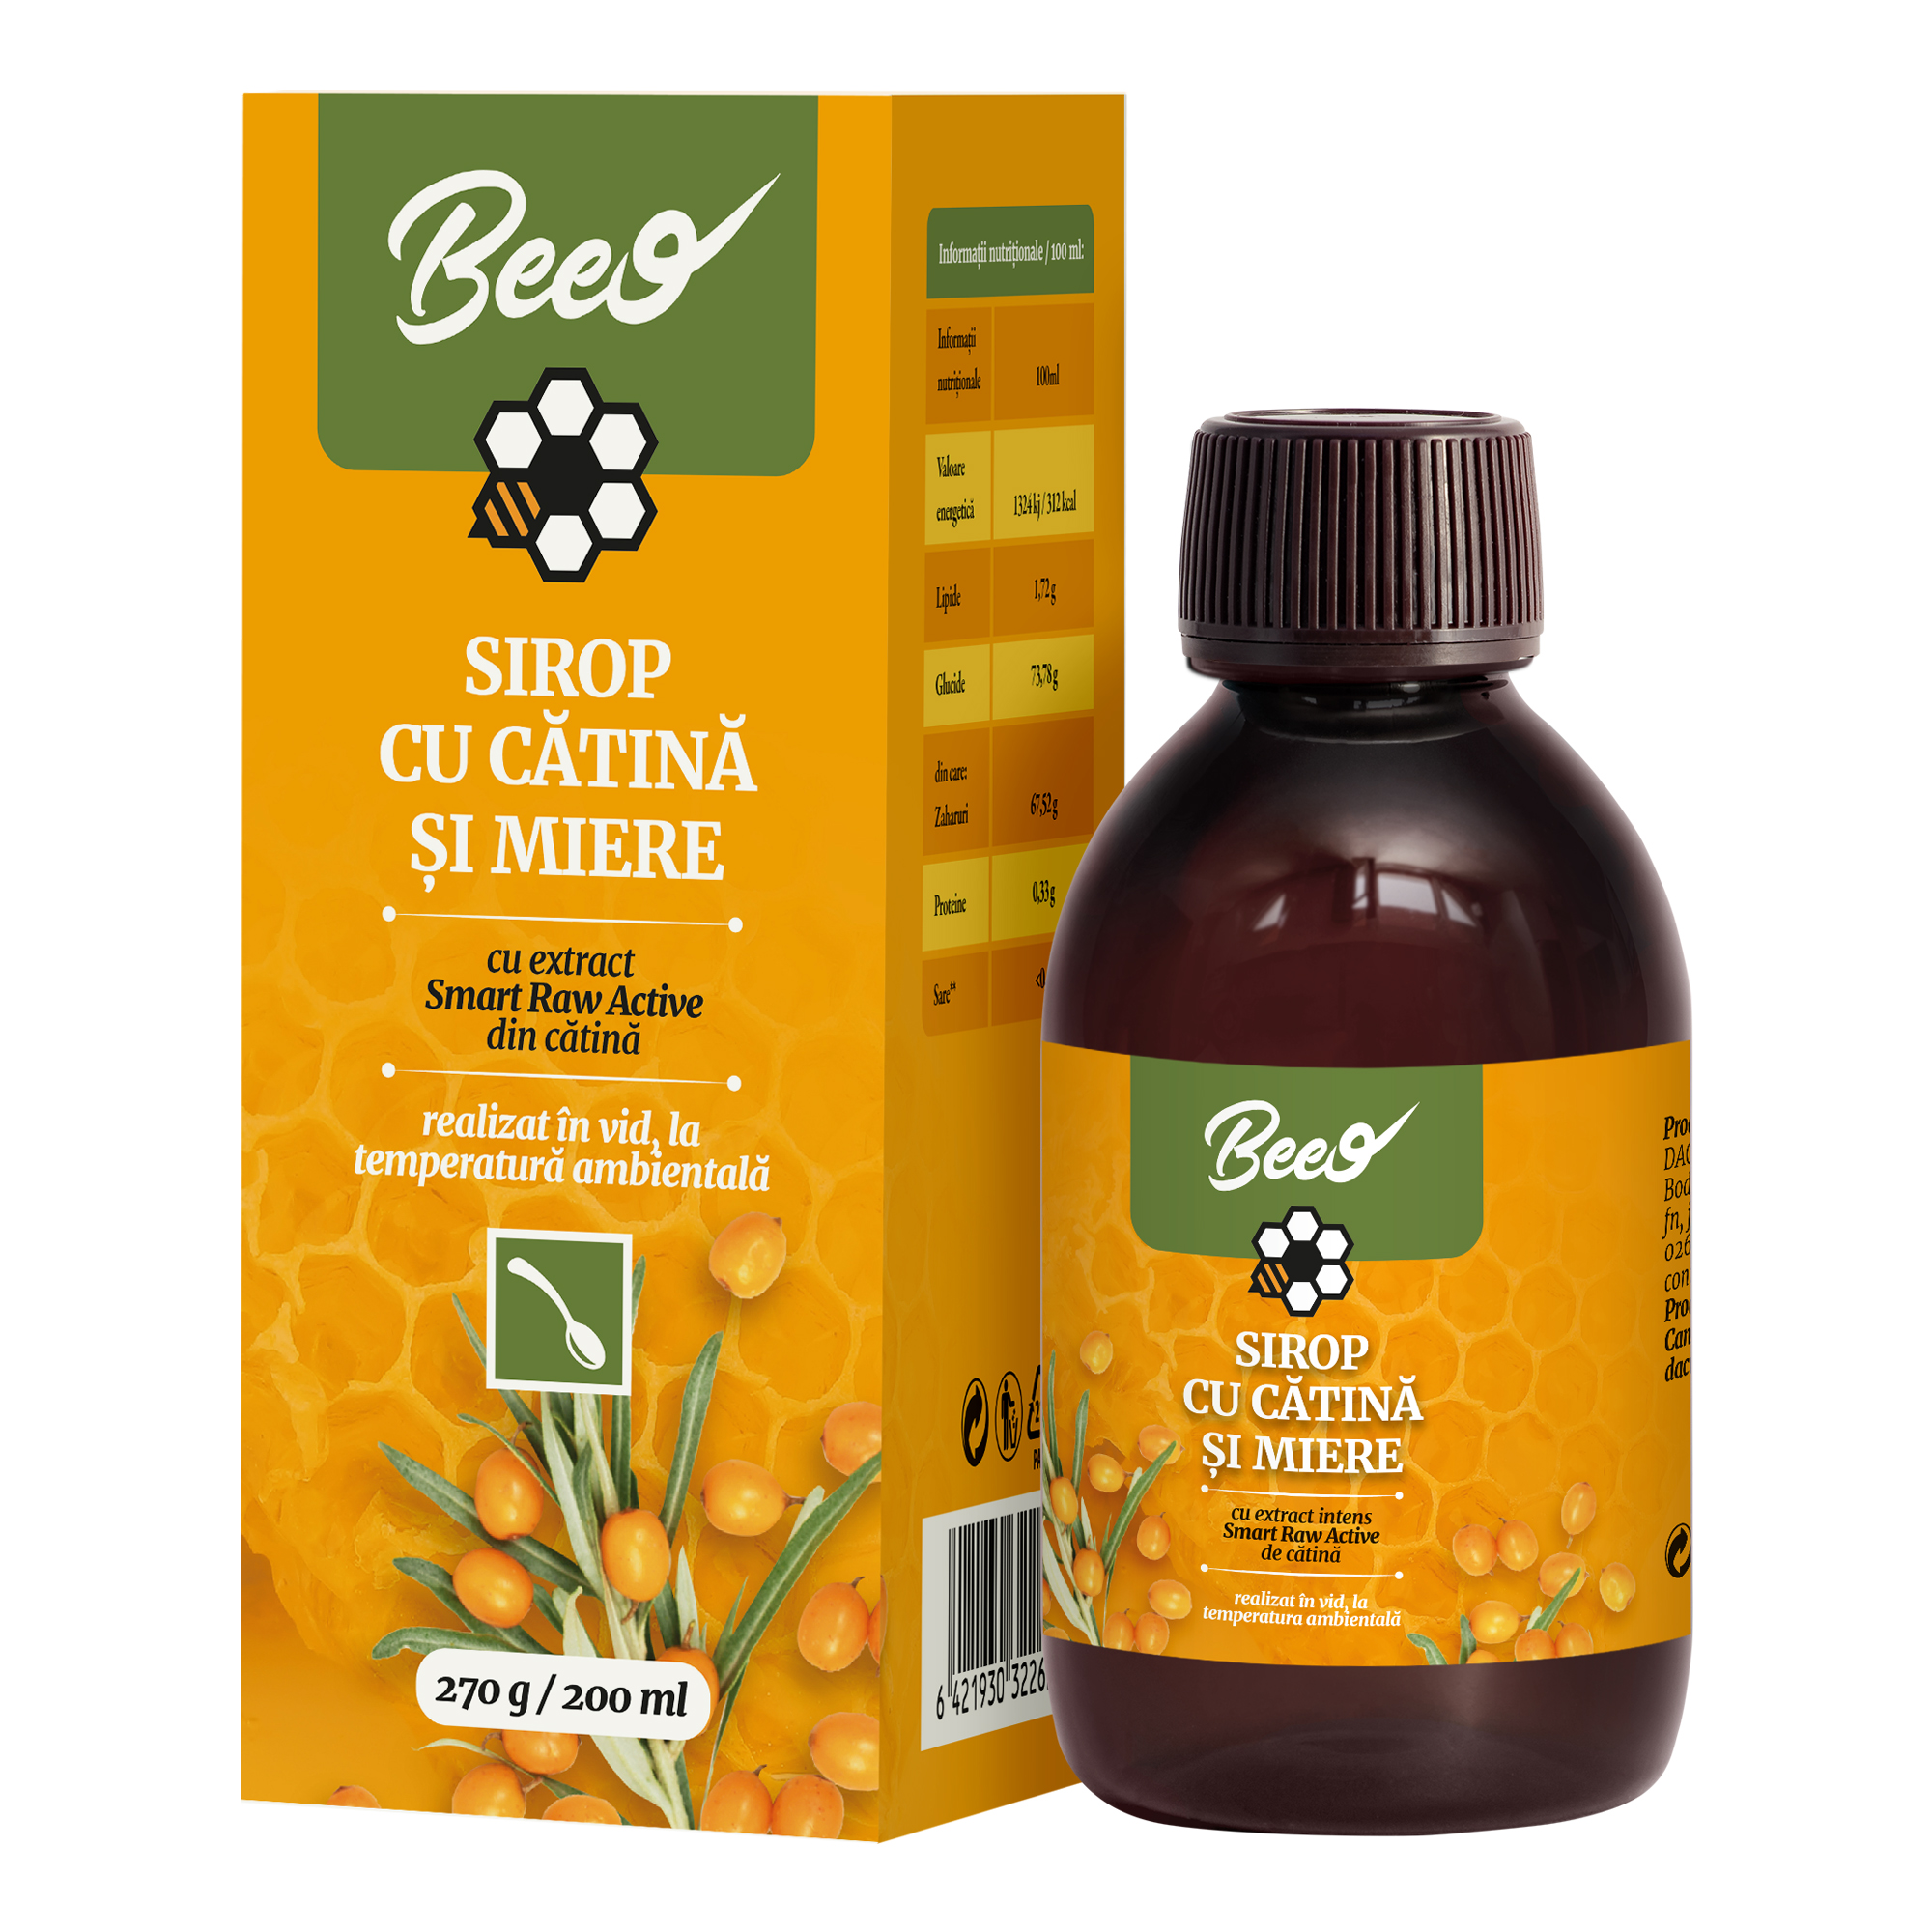 Beeo – Sirop catina si miere extract concentrat 270g Dacia Plant